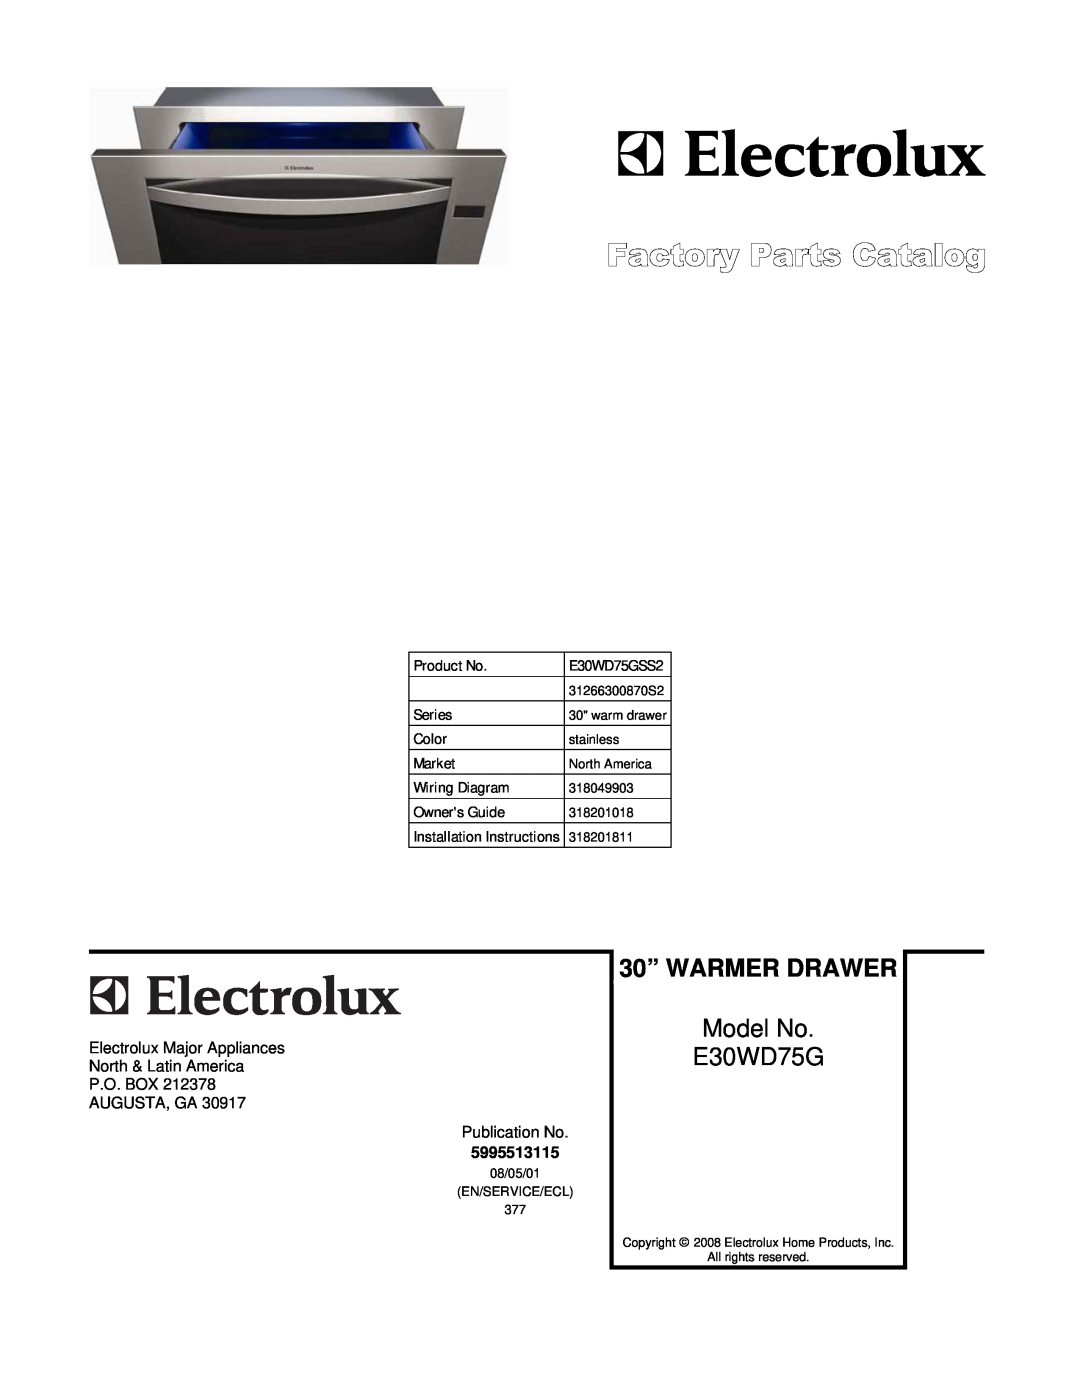 Electrolux E30WD75GSS2, 31266300870S2 installation instructions 30” WARMER DRAWER, Model No E30WD75G 